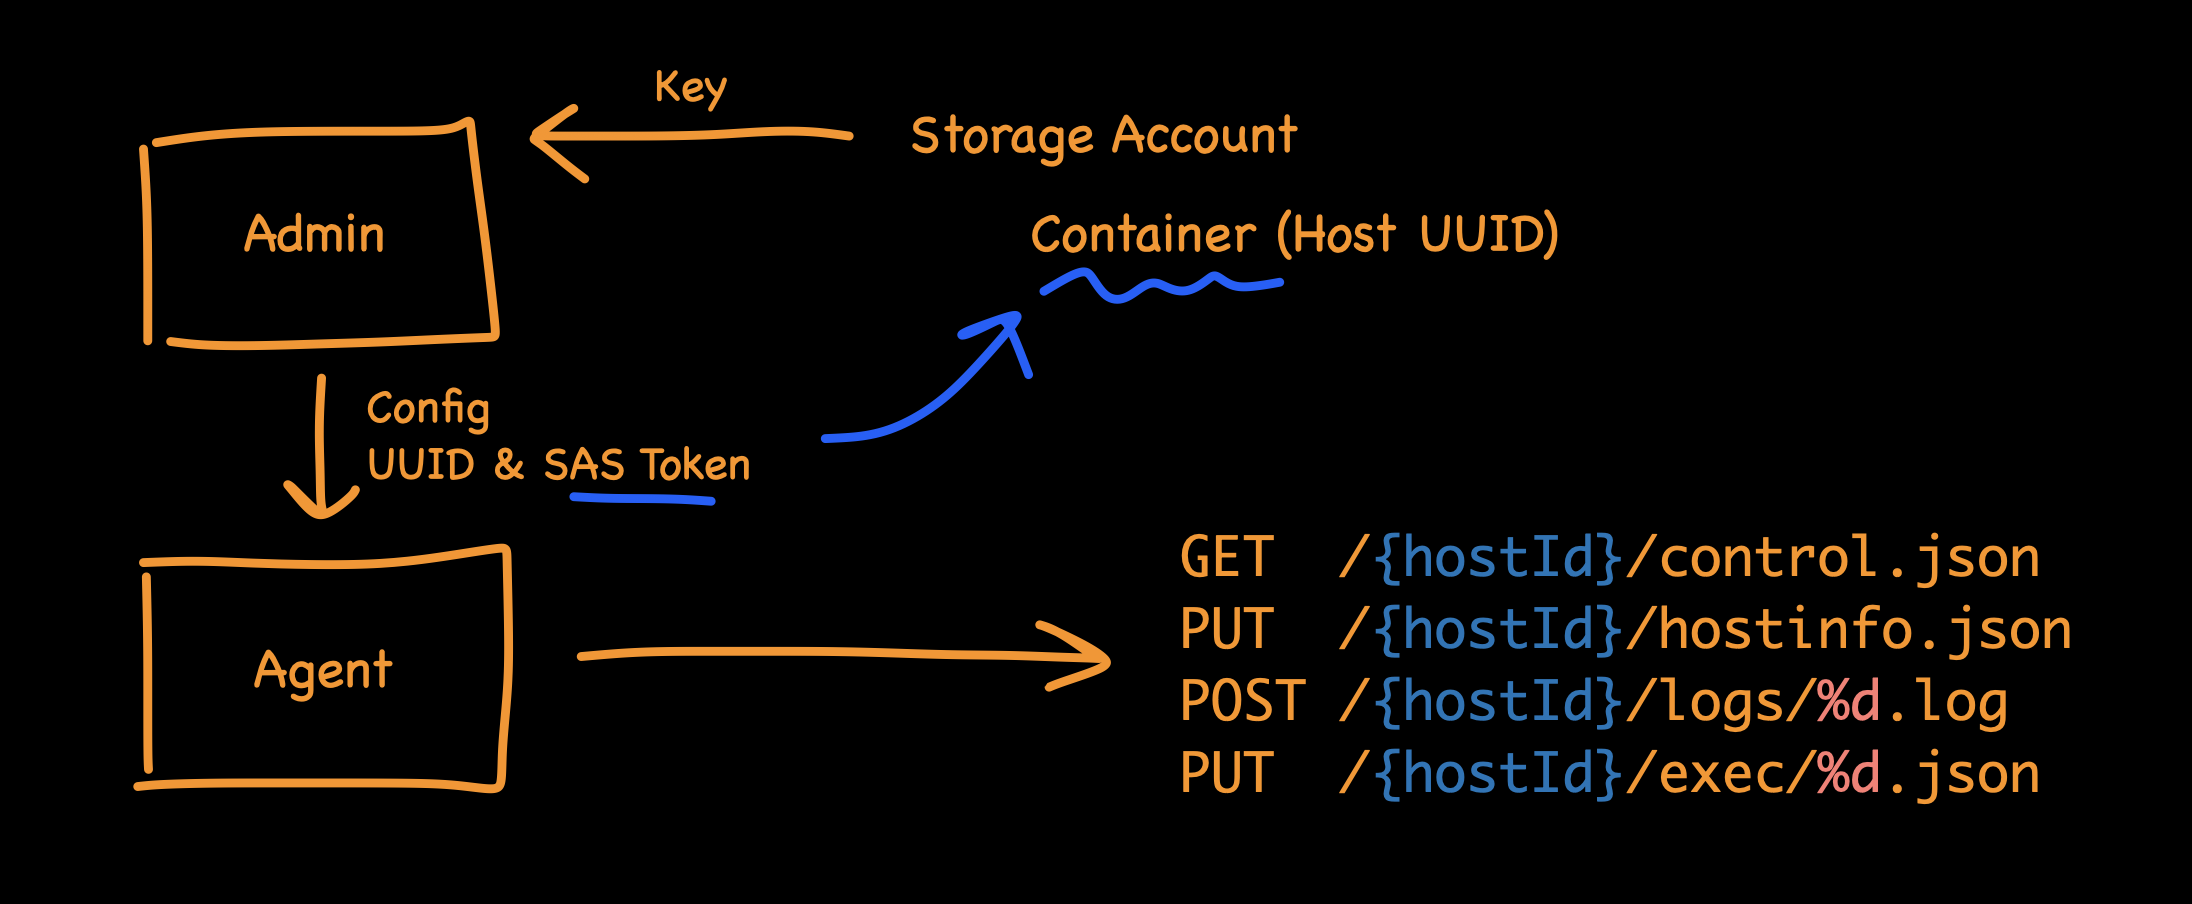 A diagram of the API design, showing how GET and PUT requests can be implemented in blob storage